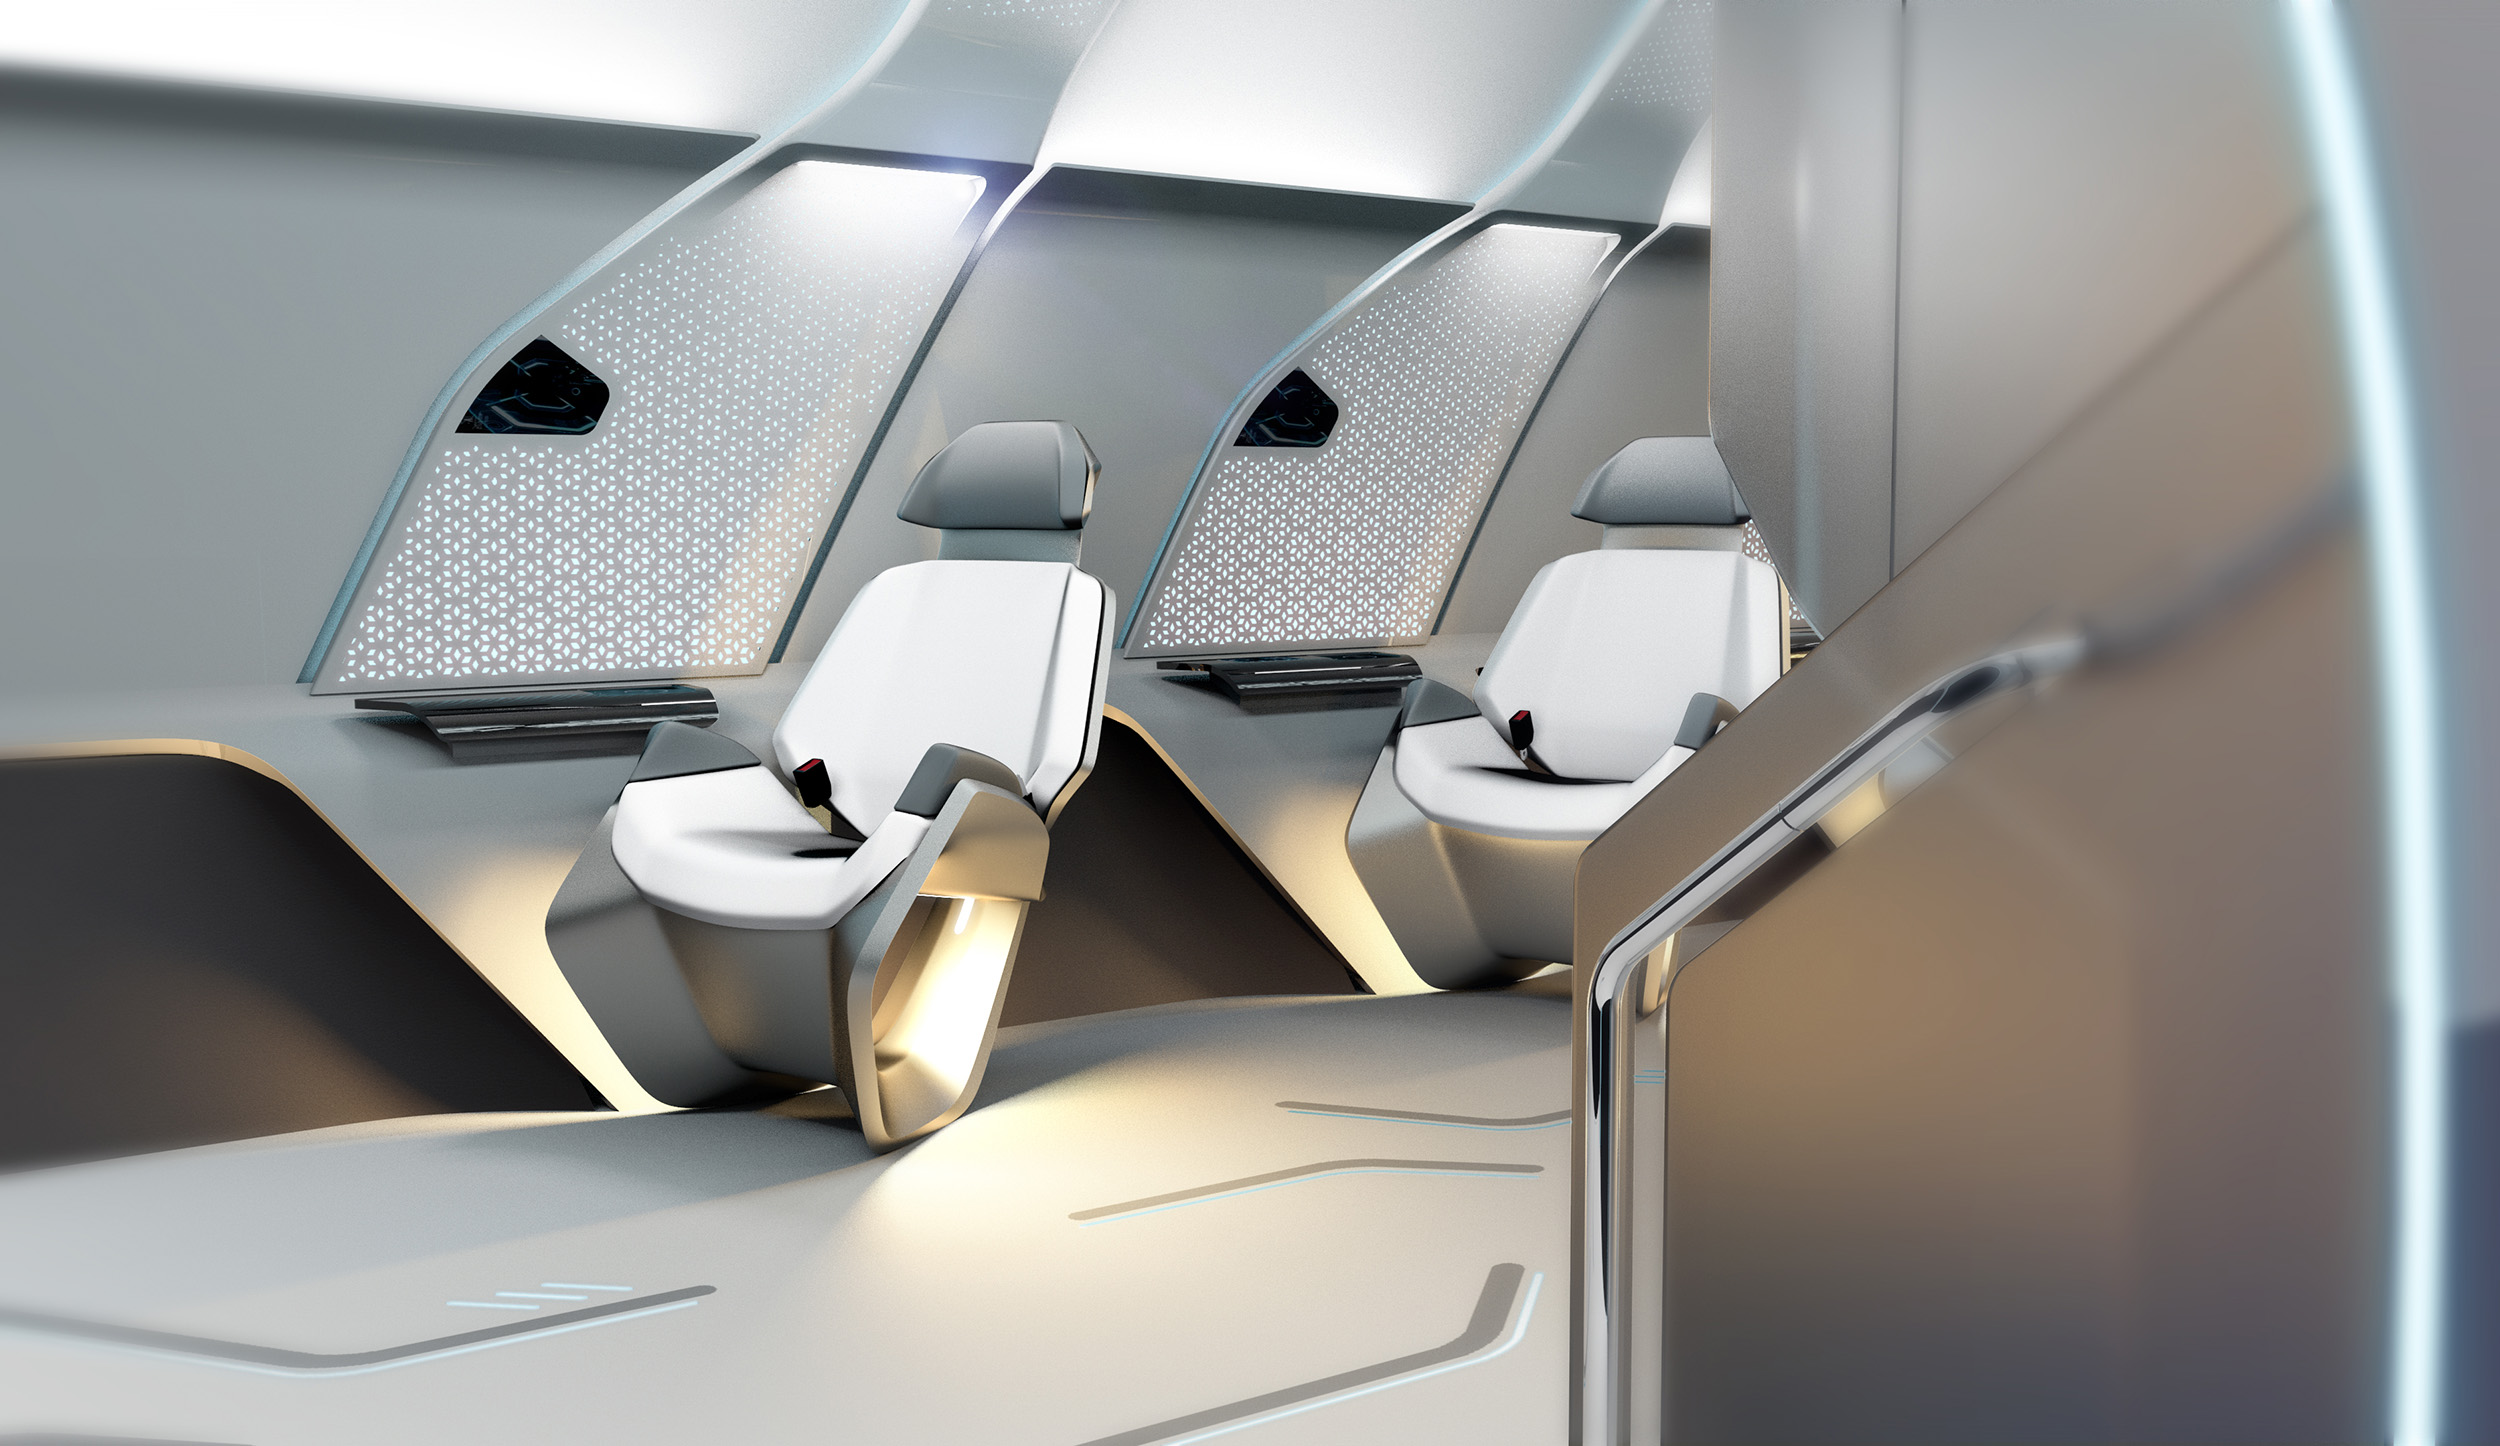 hyperloop seats from the entrance of the capsule